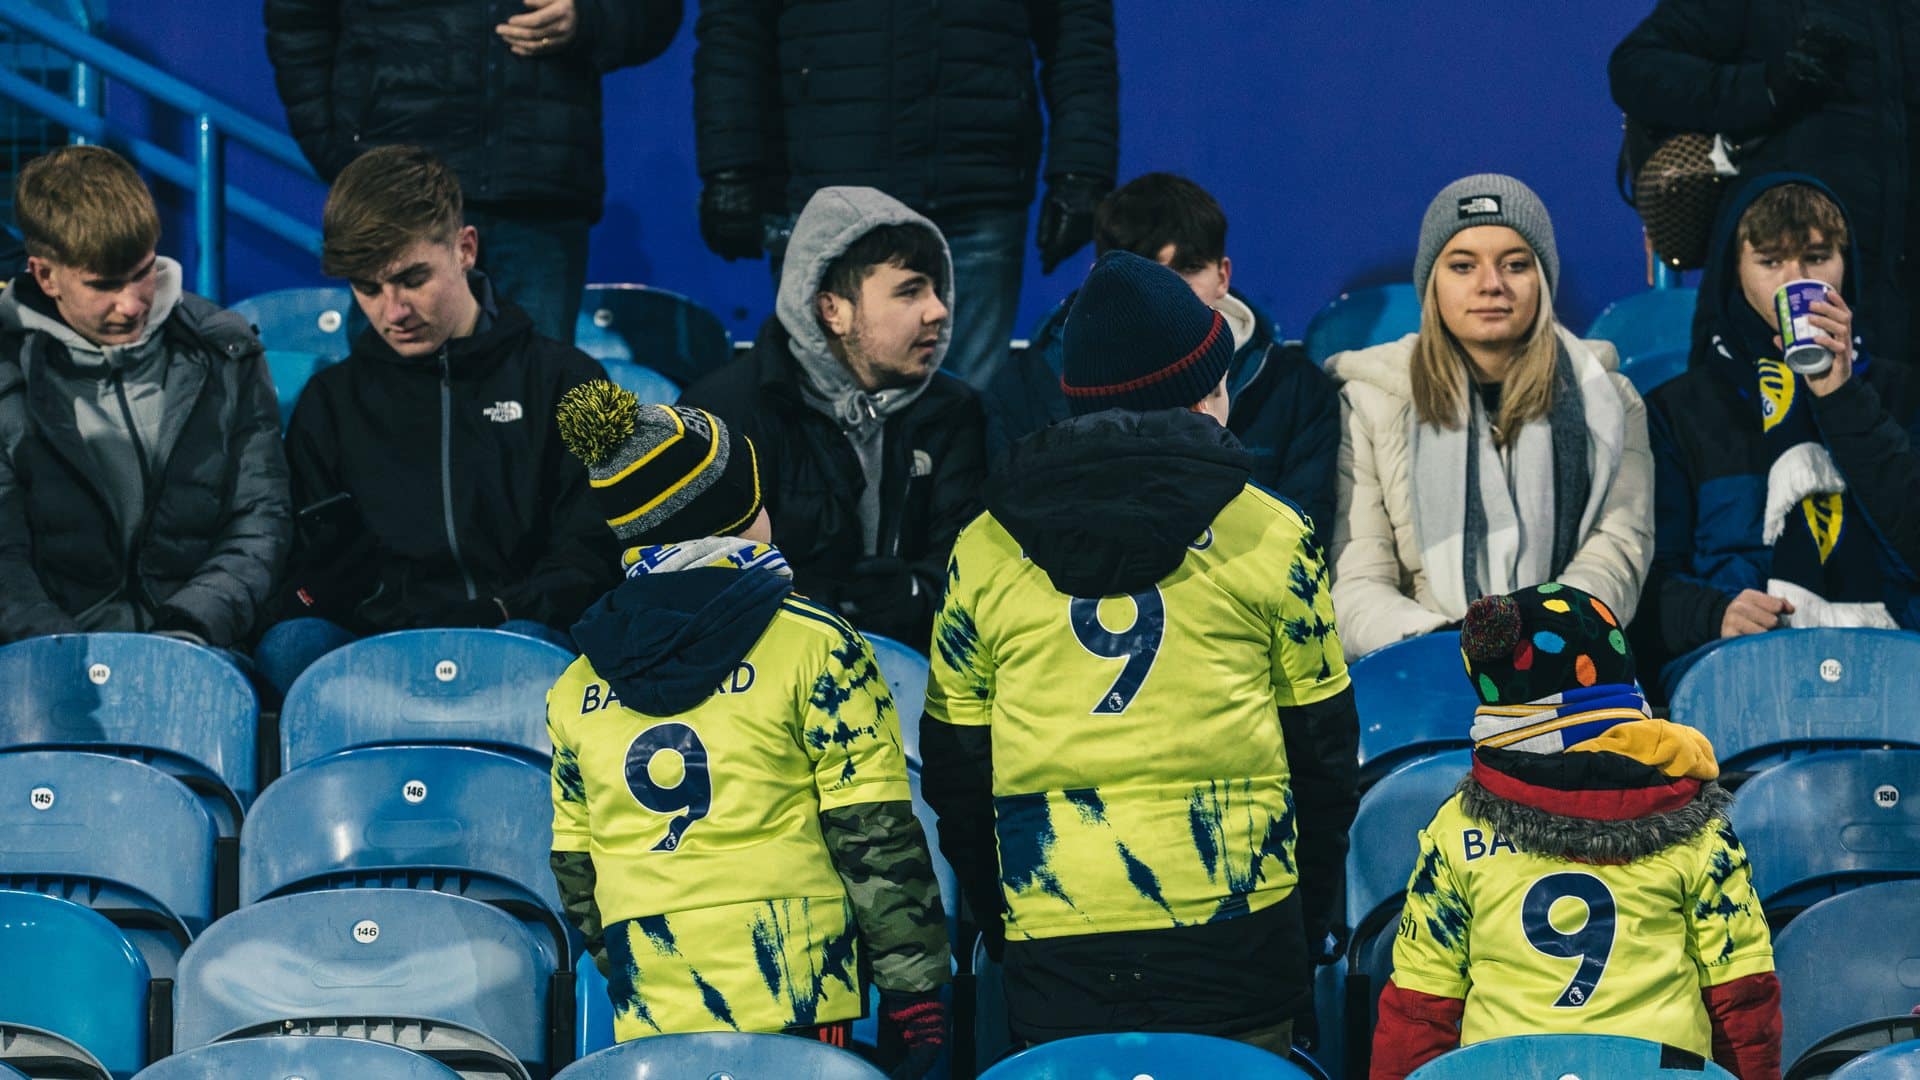 Three young Leeds fans turning their backs and showing three identical 'Bamford 9's on the back of their blue cheese away shirts